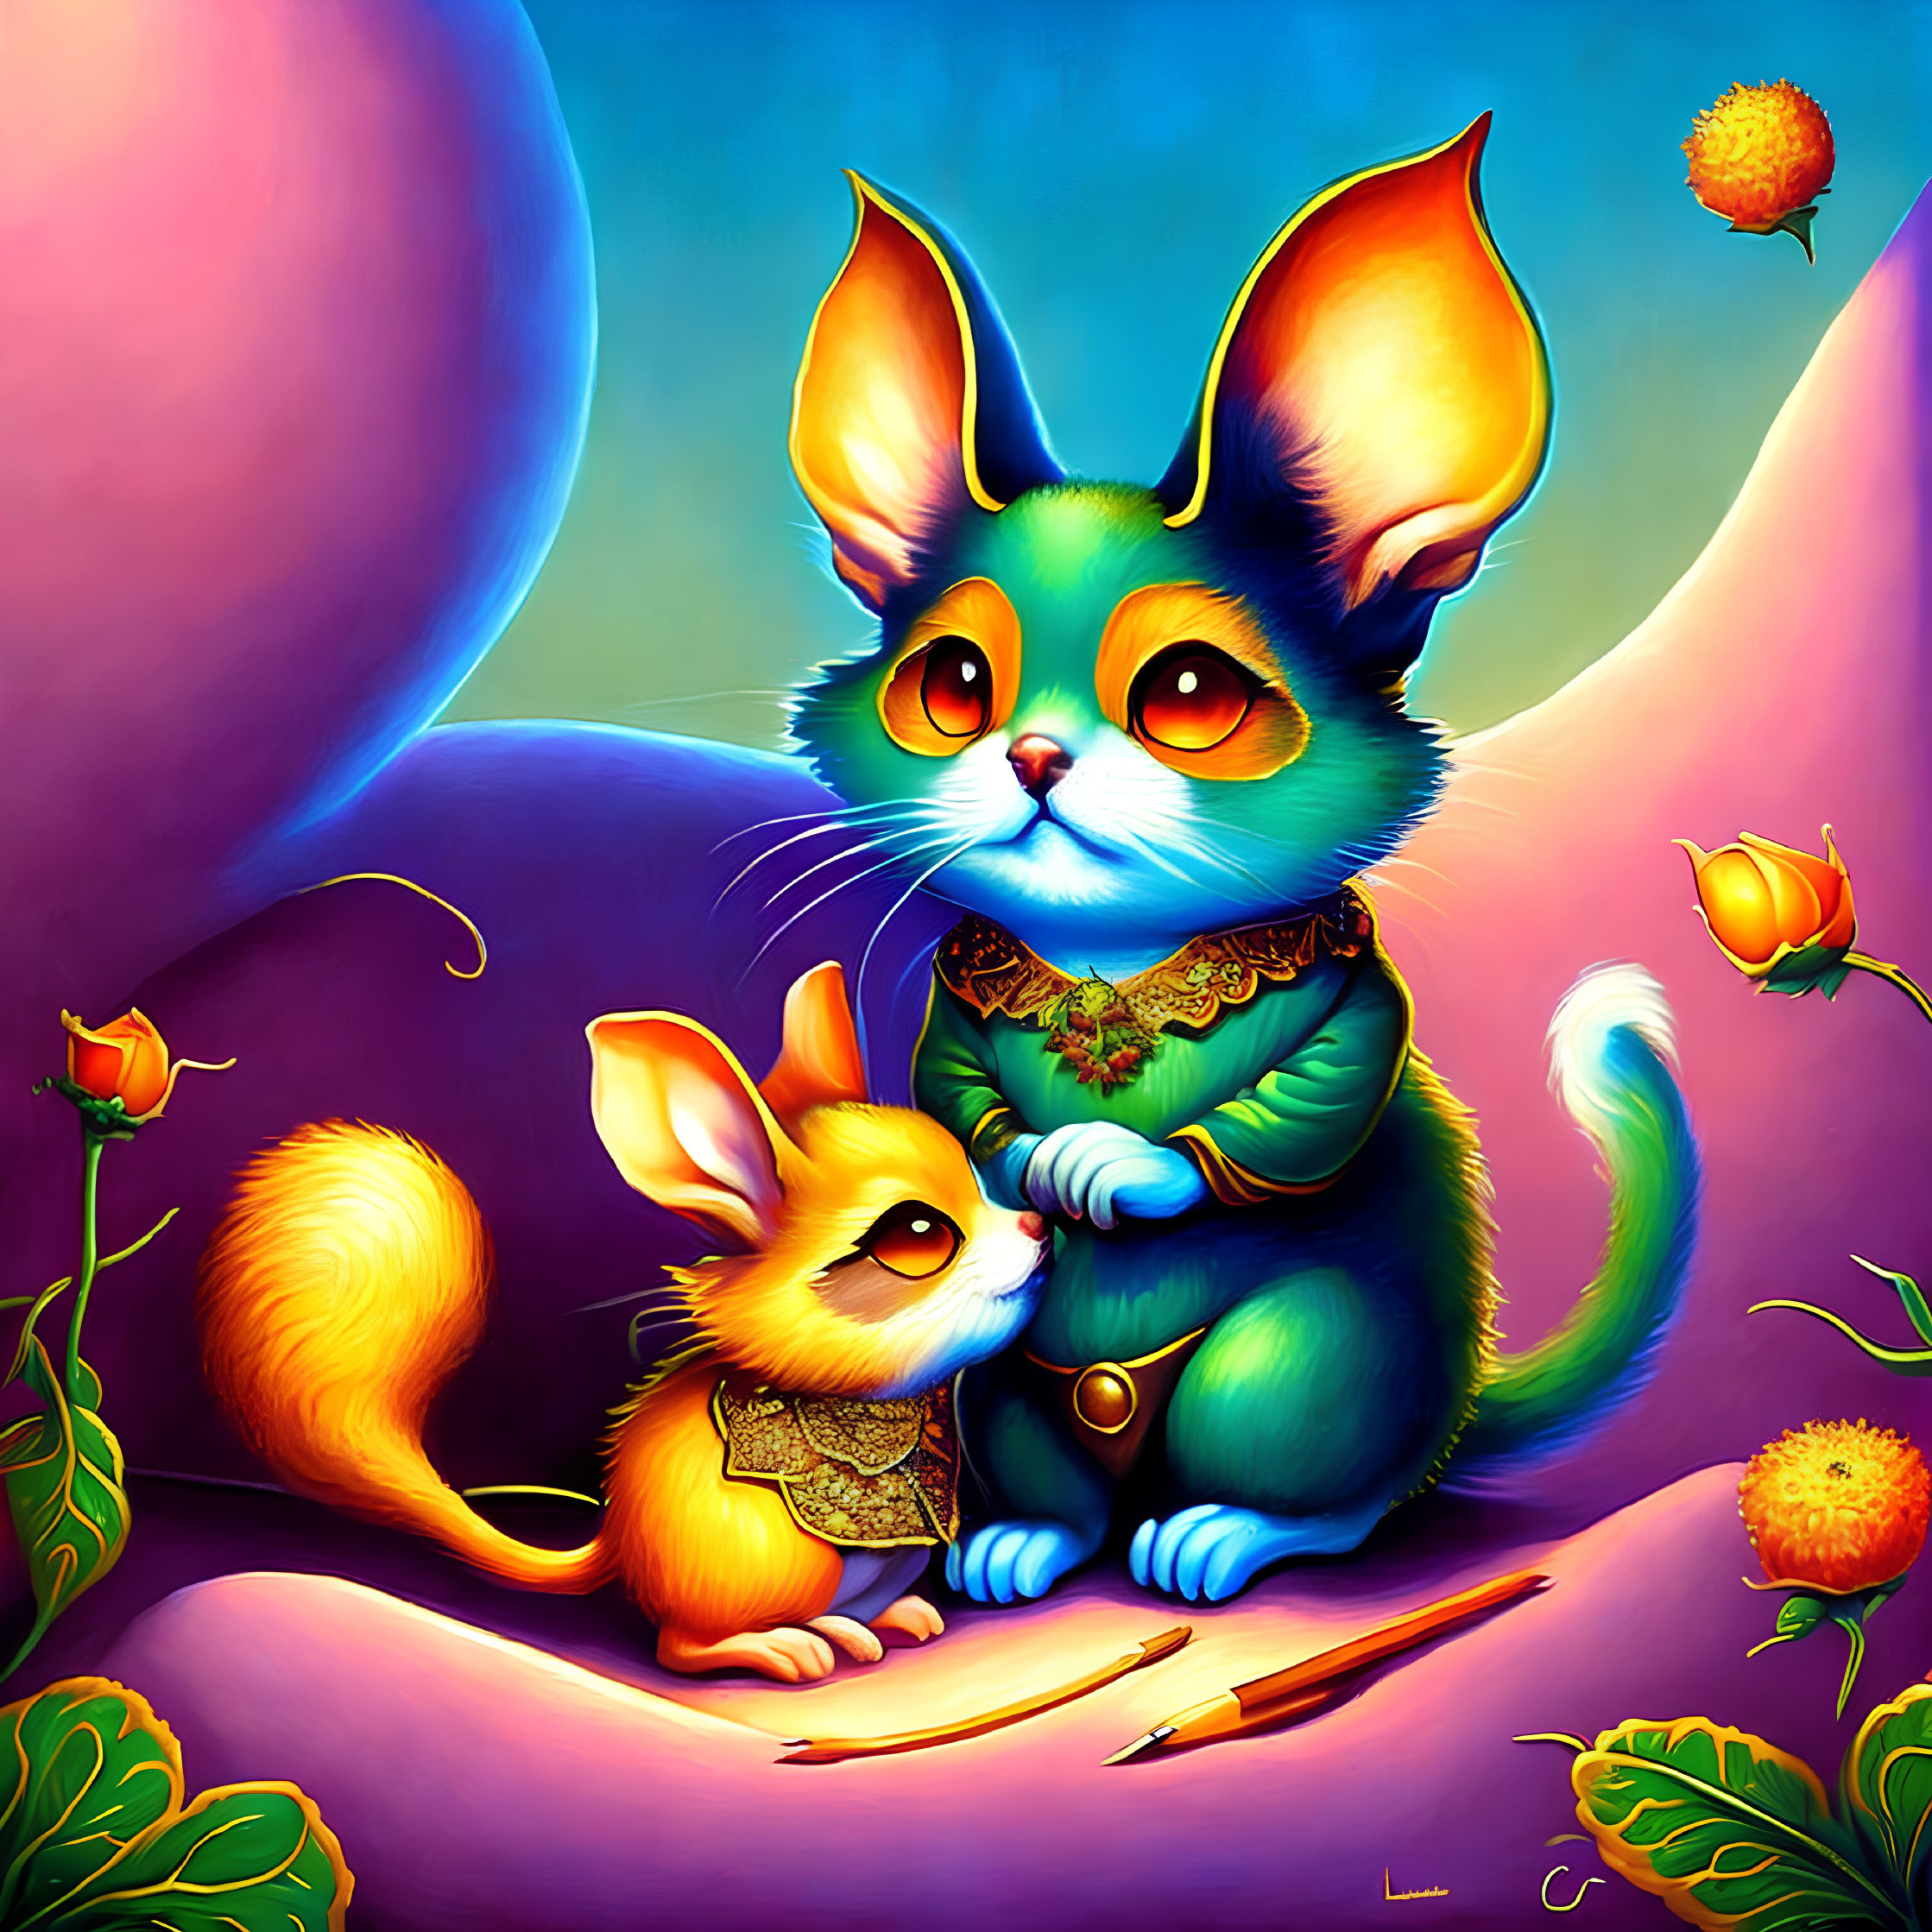 Colorful anthropomorphic cat and orange creature in whimsical setting